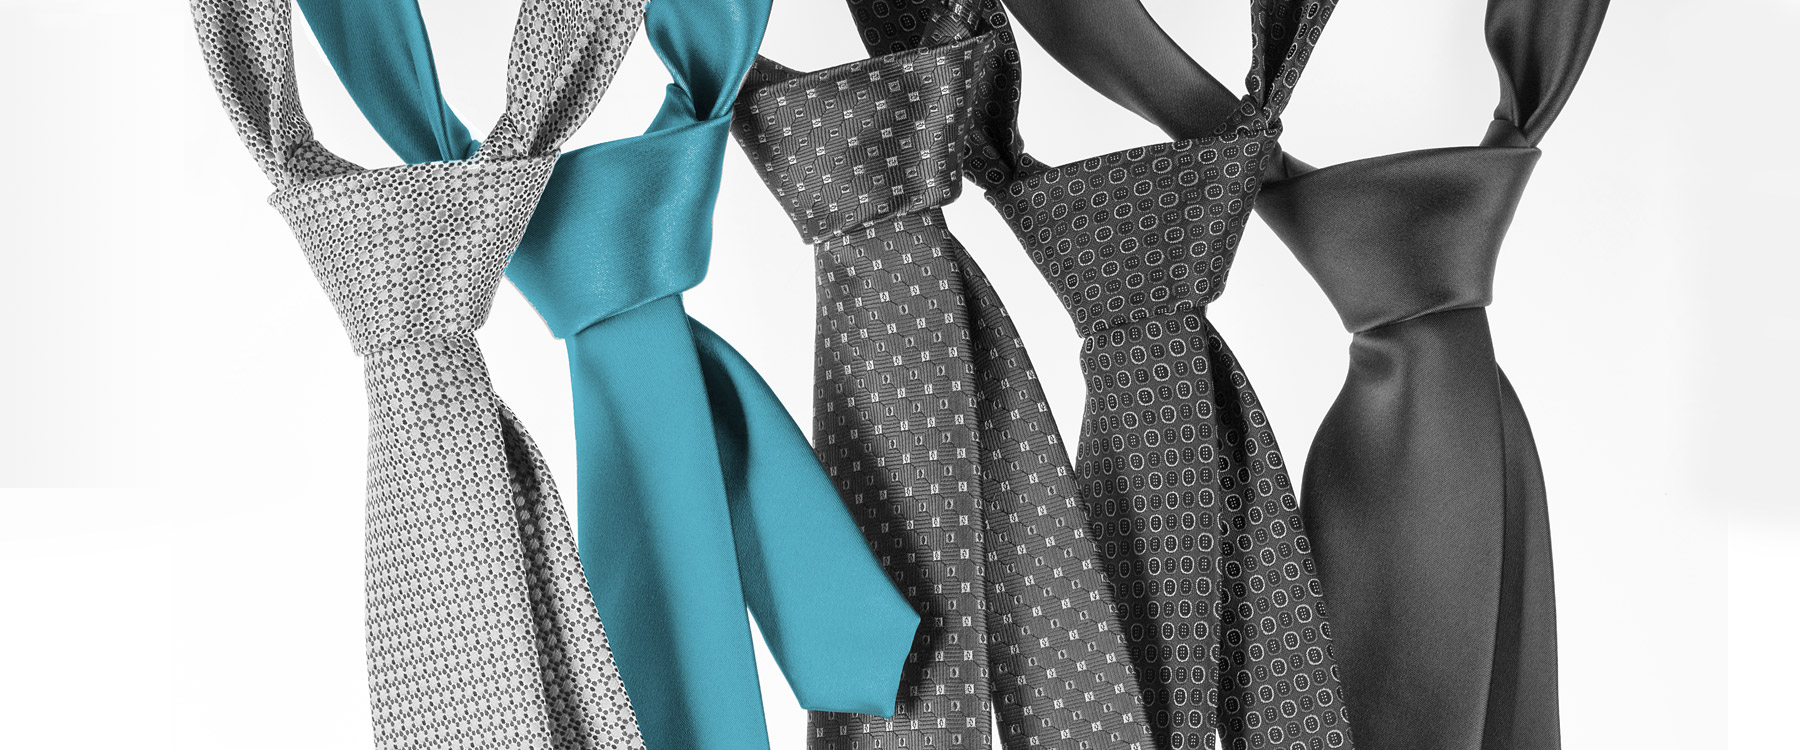 group of black, white, gray and turquoise neckties.